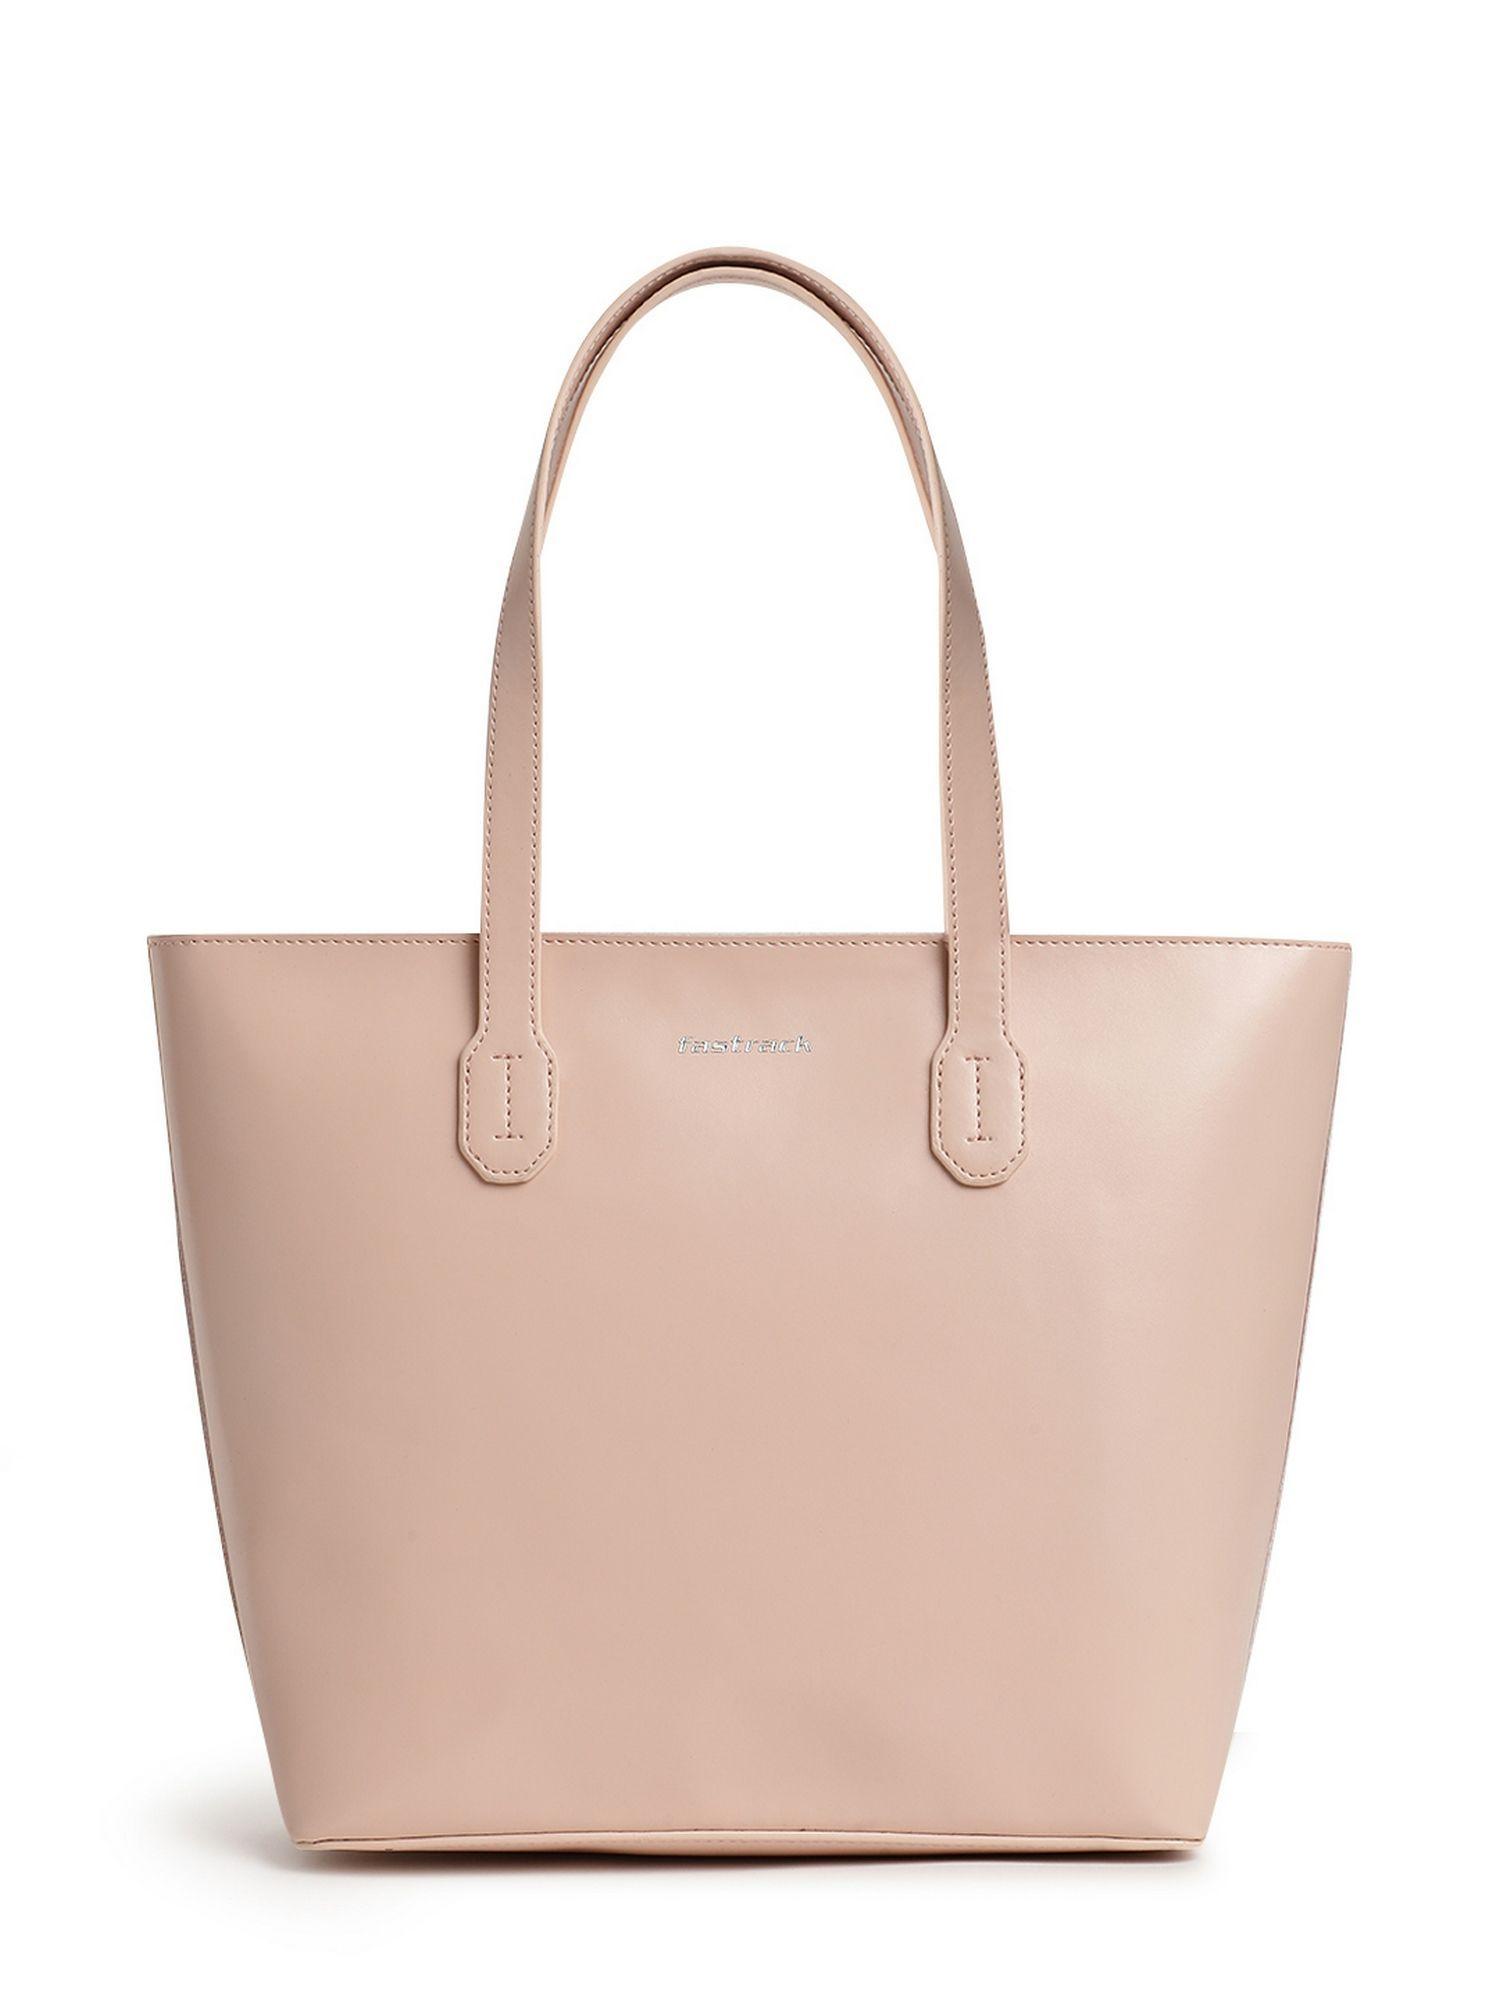 powder pink college tote bag for women